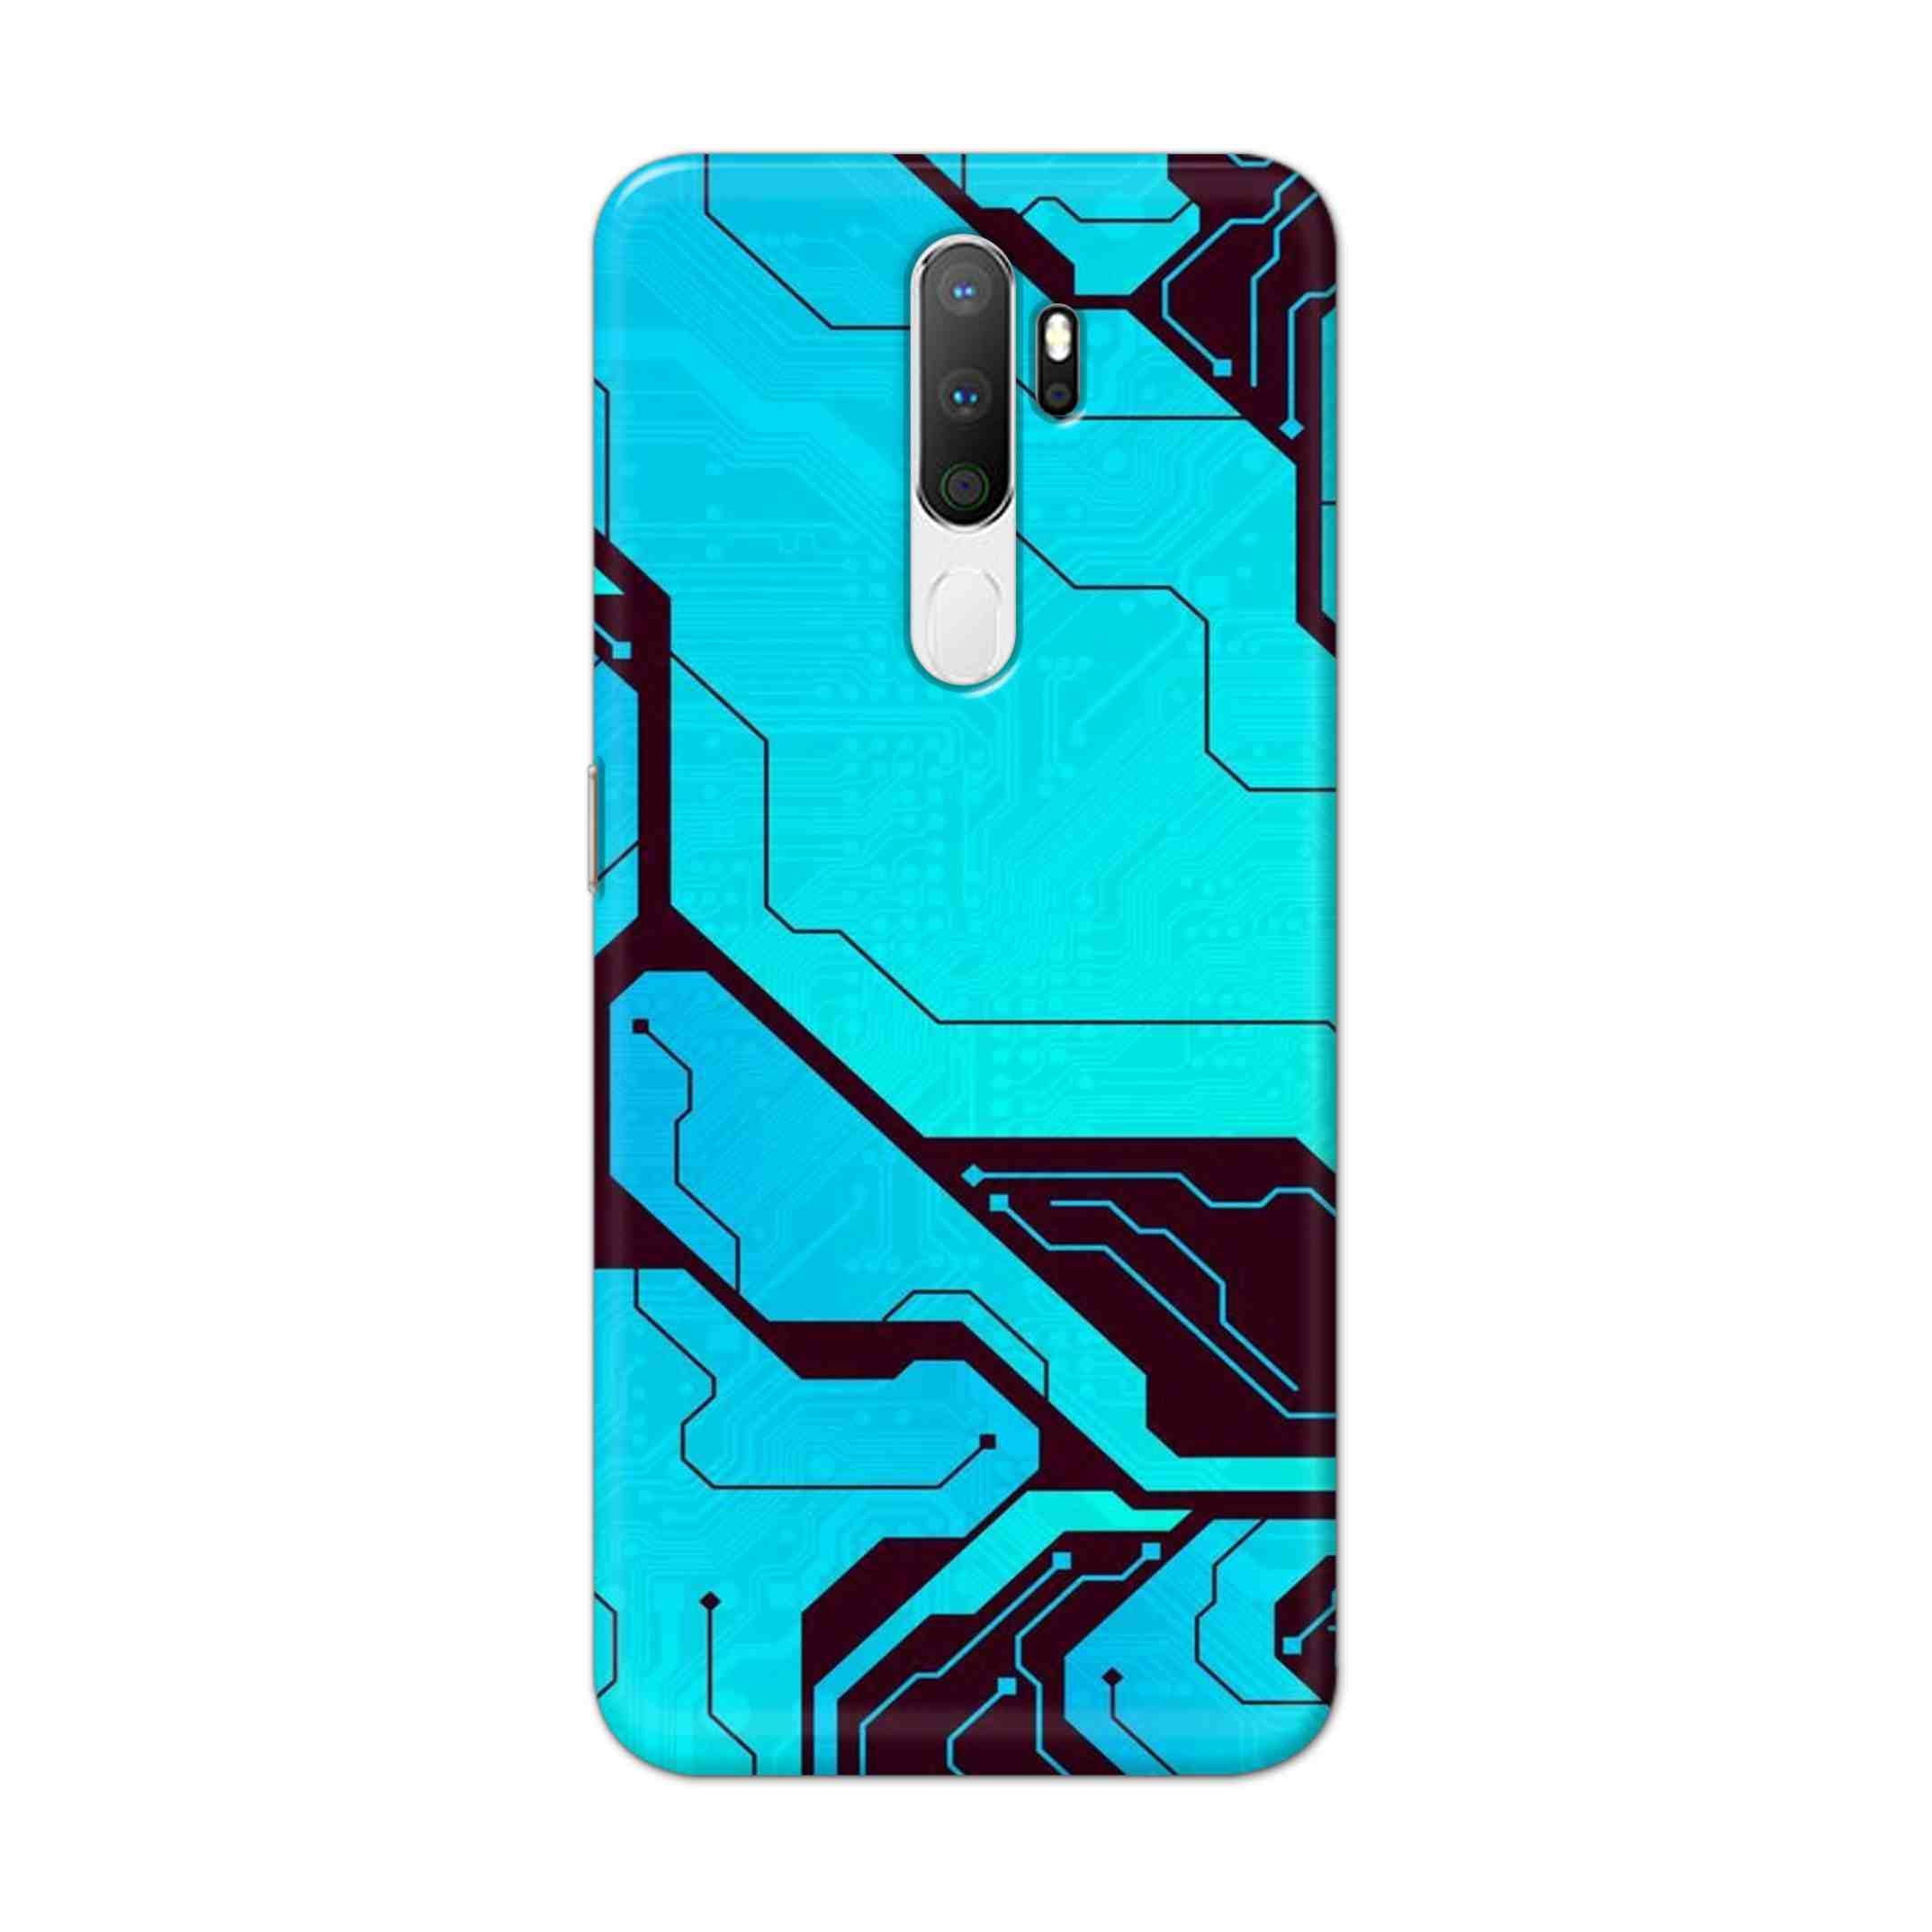 Buy Futuristic Line Hard Back Mobile Phone Case Cover For Oppo A5 (2020) Online